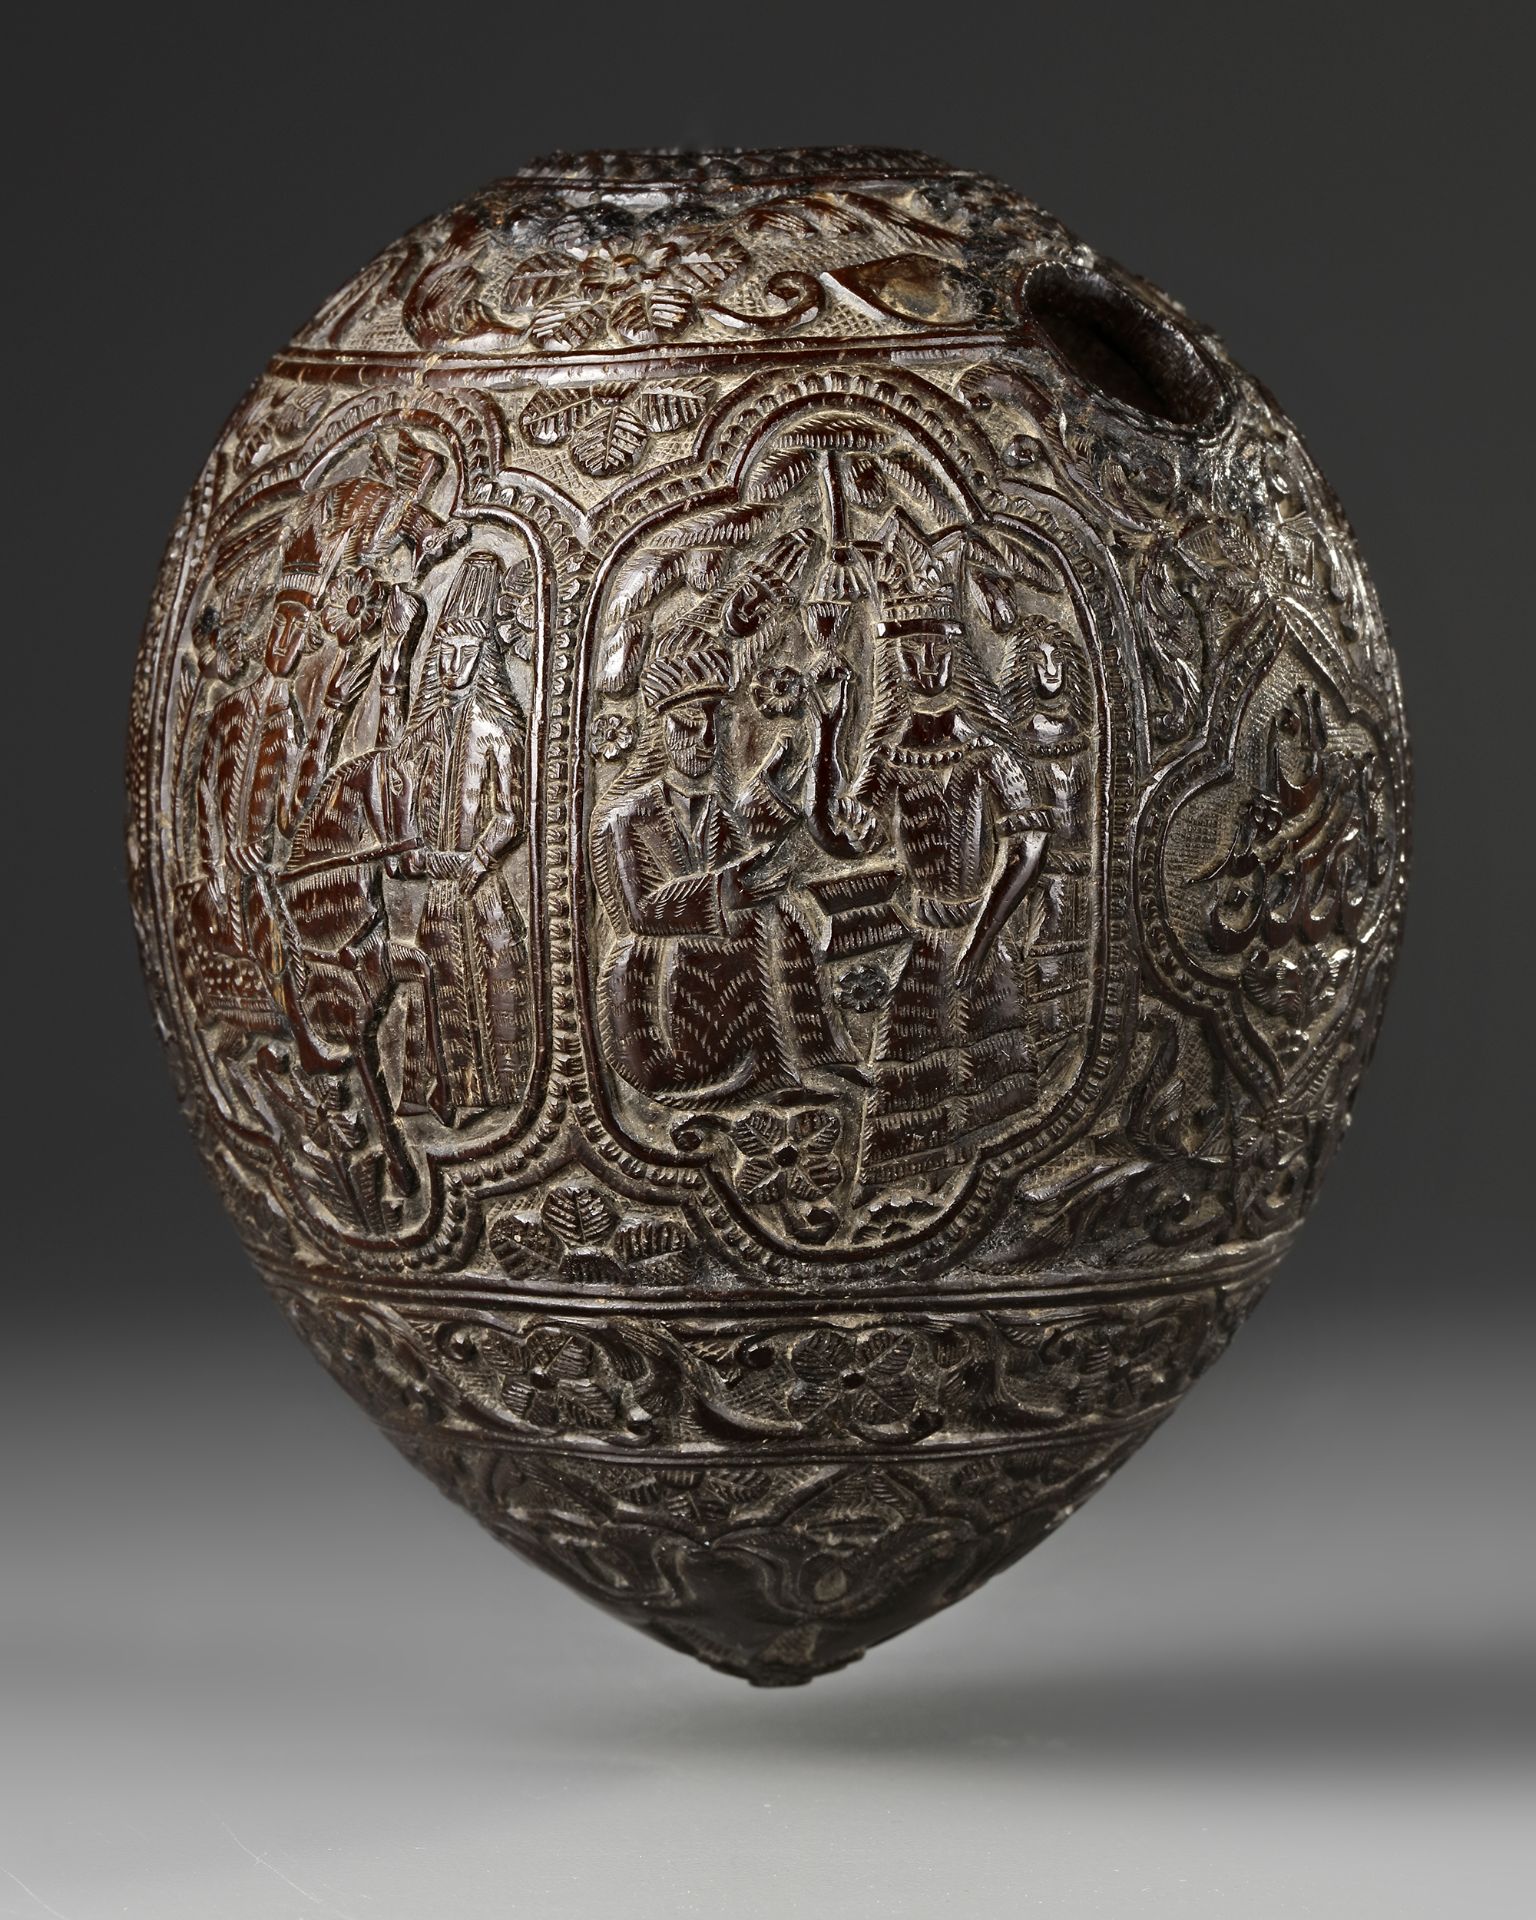 A QAJAR CARVED COCONUT HUQQA BASE, PERSIA, EARLY 19TH CENTURY - Image 4 of 9